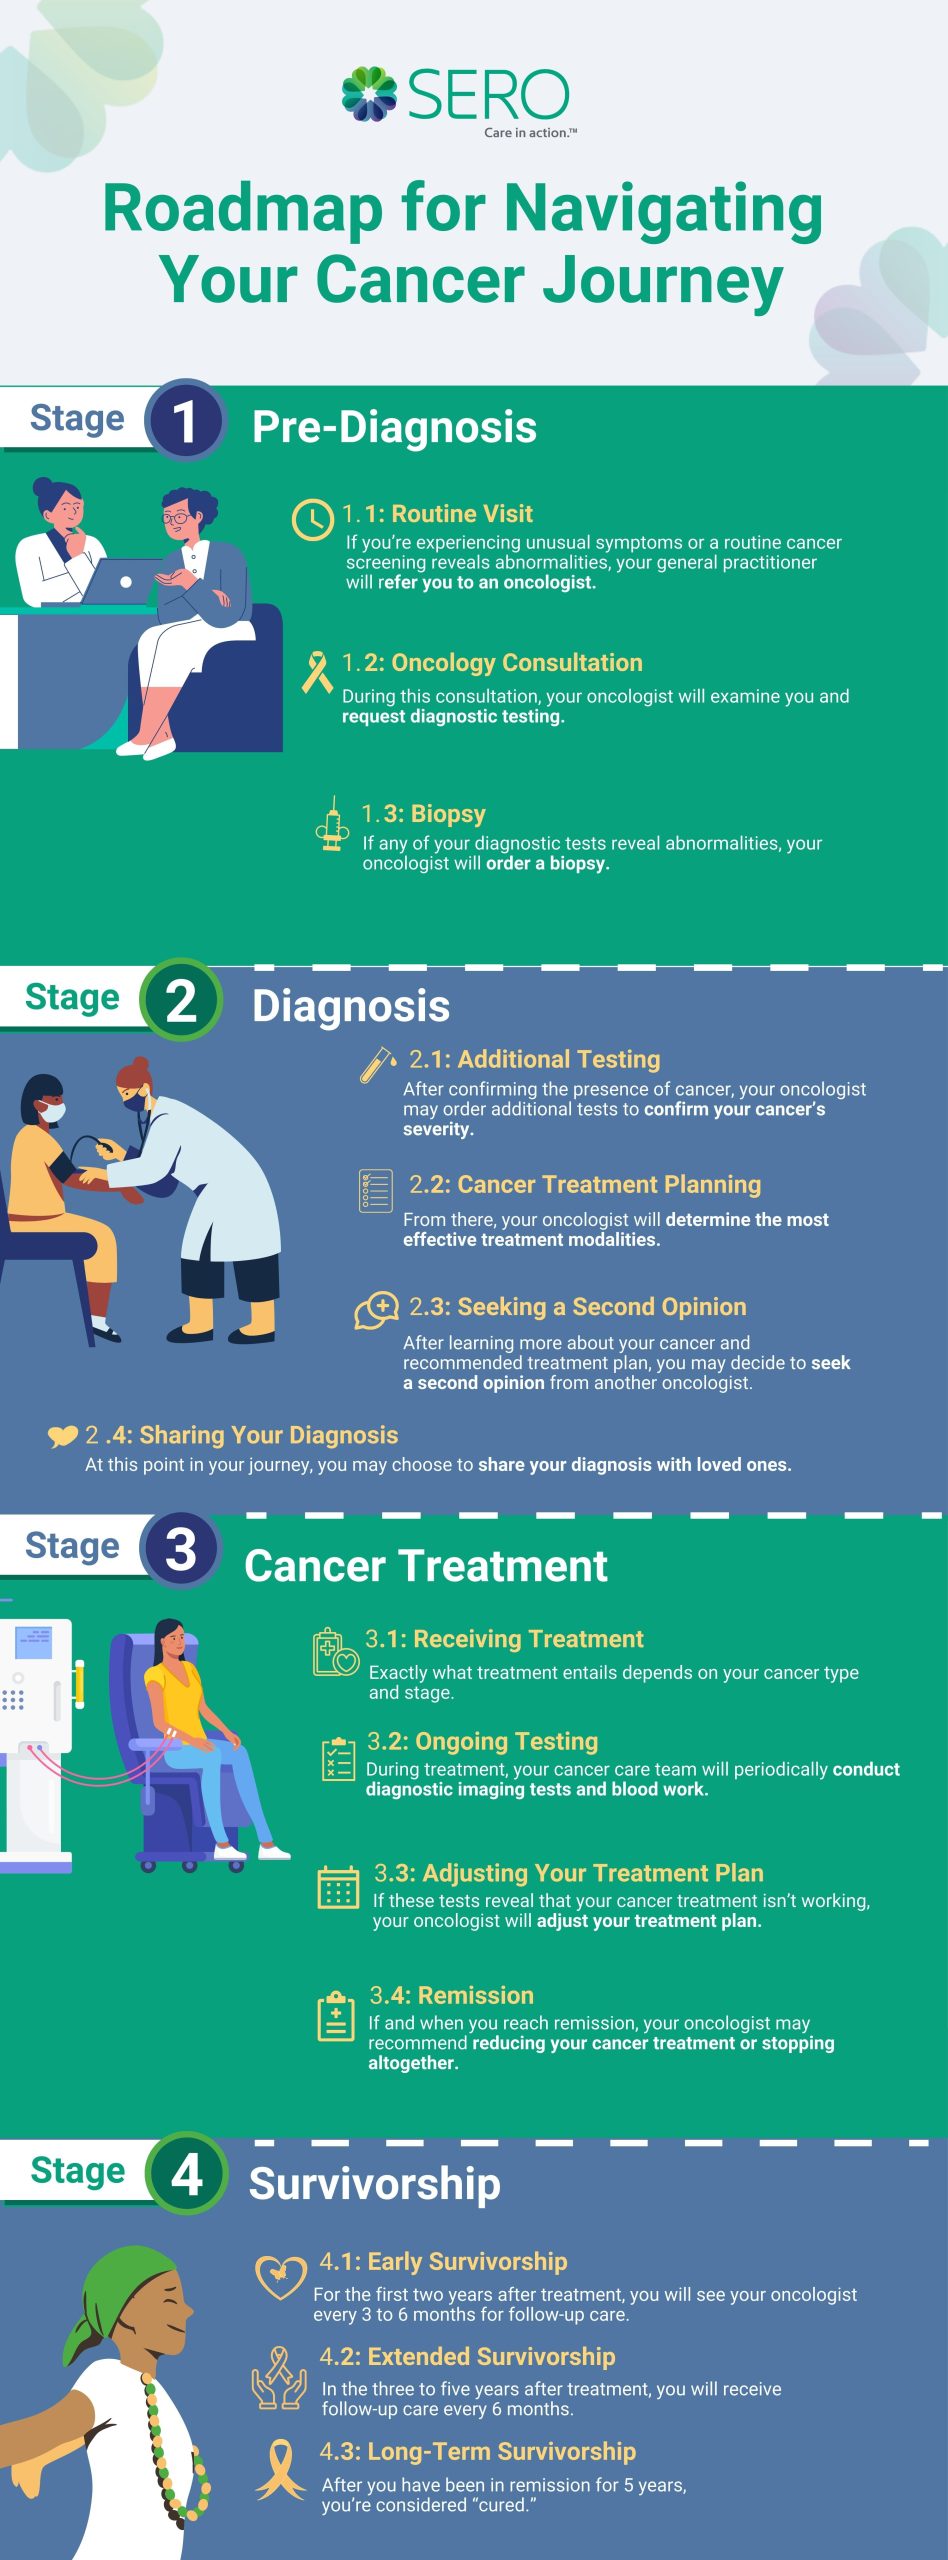 Stages of the Cancer Journey Infographic presented by SERO